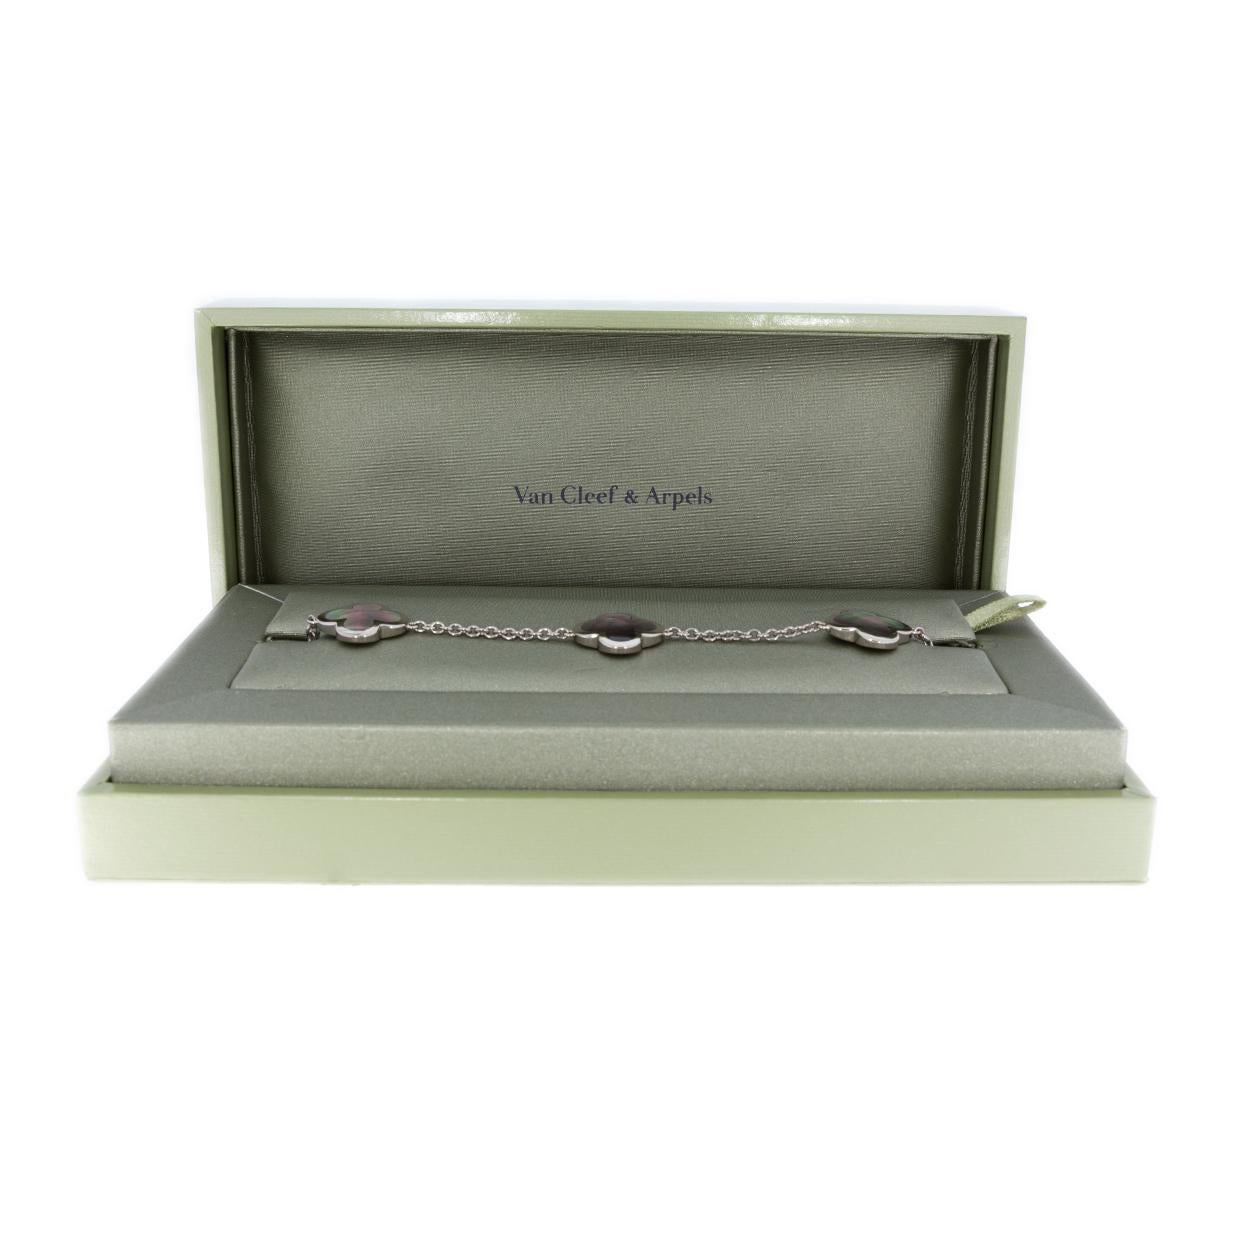 Item Details
Main Stone Treatment Not Enhanced
Main Stone Shape Specialty
Main Stone Creation Natural
Main Stone Mother Of Pearl
Estimated Retail $5,800.00
Brand Van Cleef & Arpels
Metal White Gold
Style Chain
Fastening Box
Length (inches) 7.2